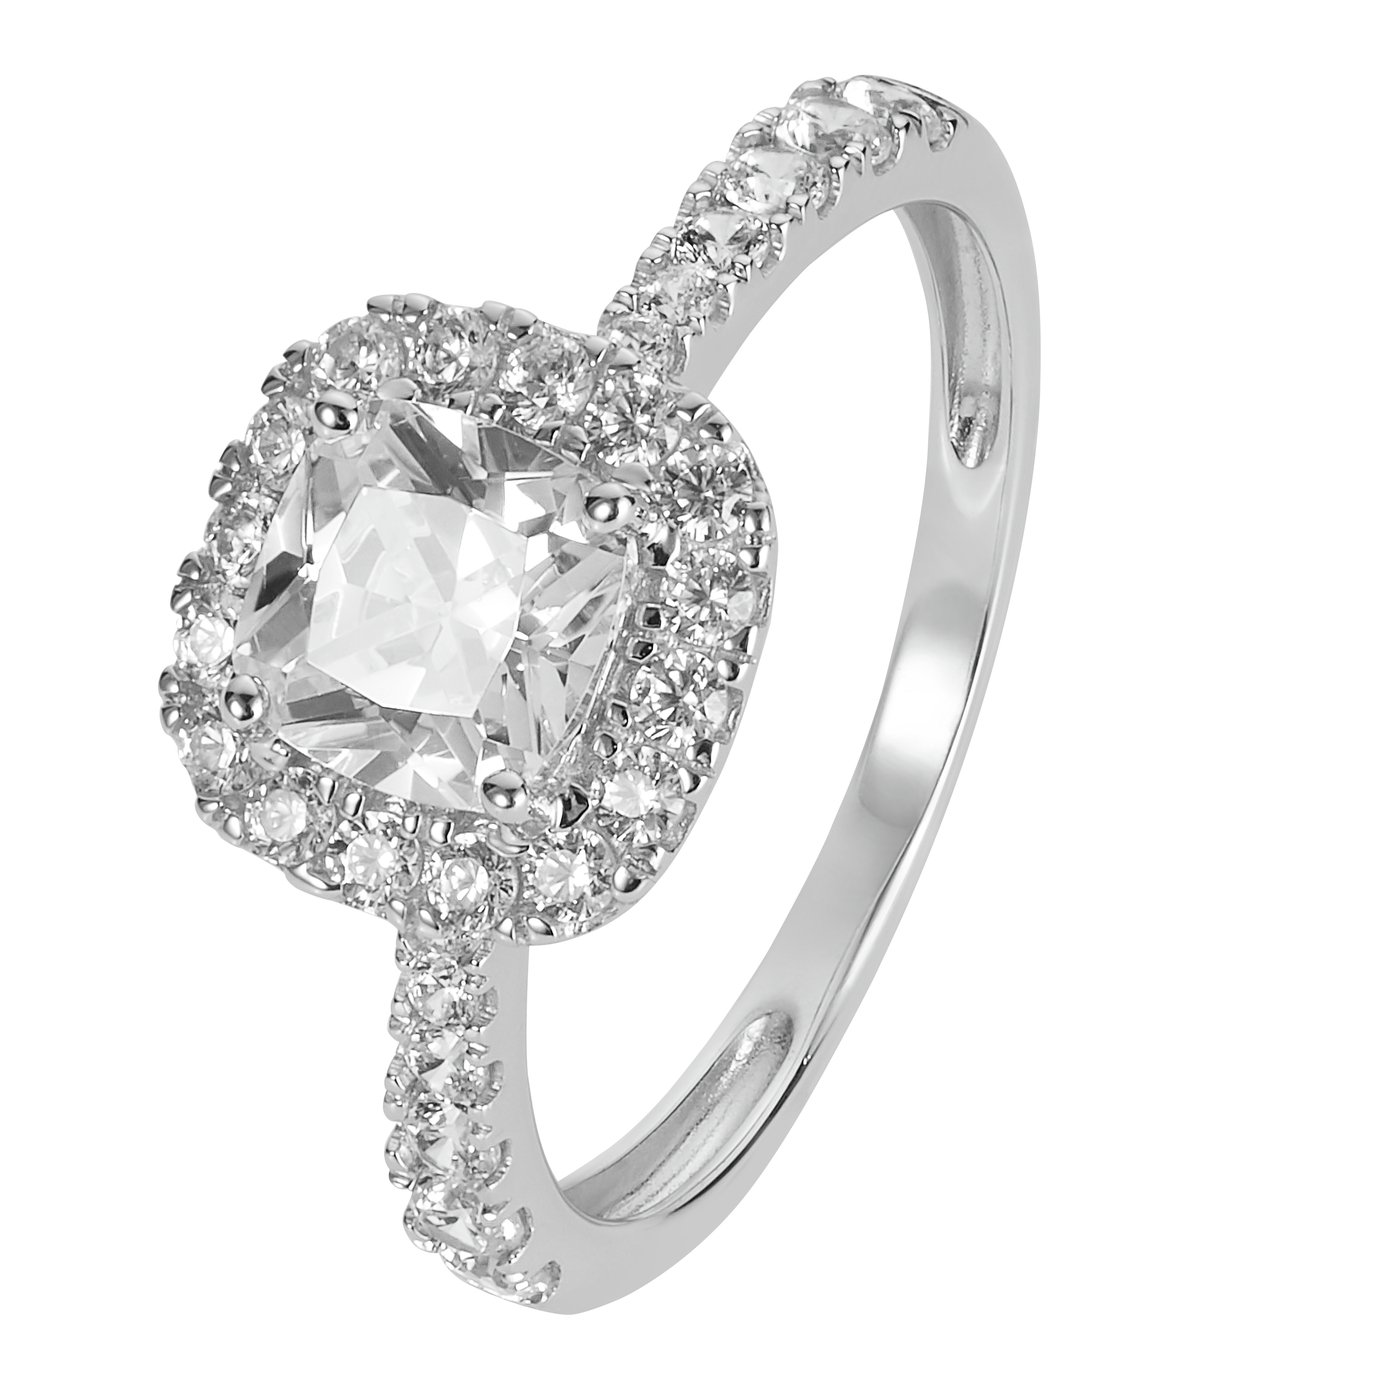 Revere 9ct White Gold Cubic Zirconia Halo Engagement Ring  Q